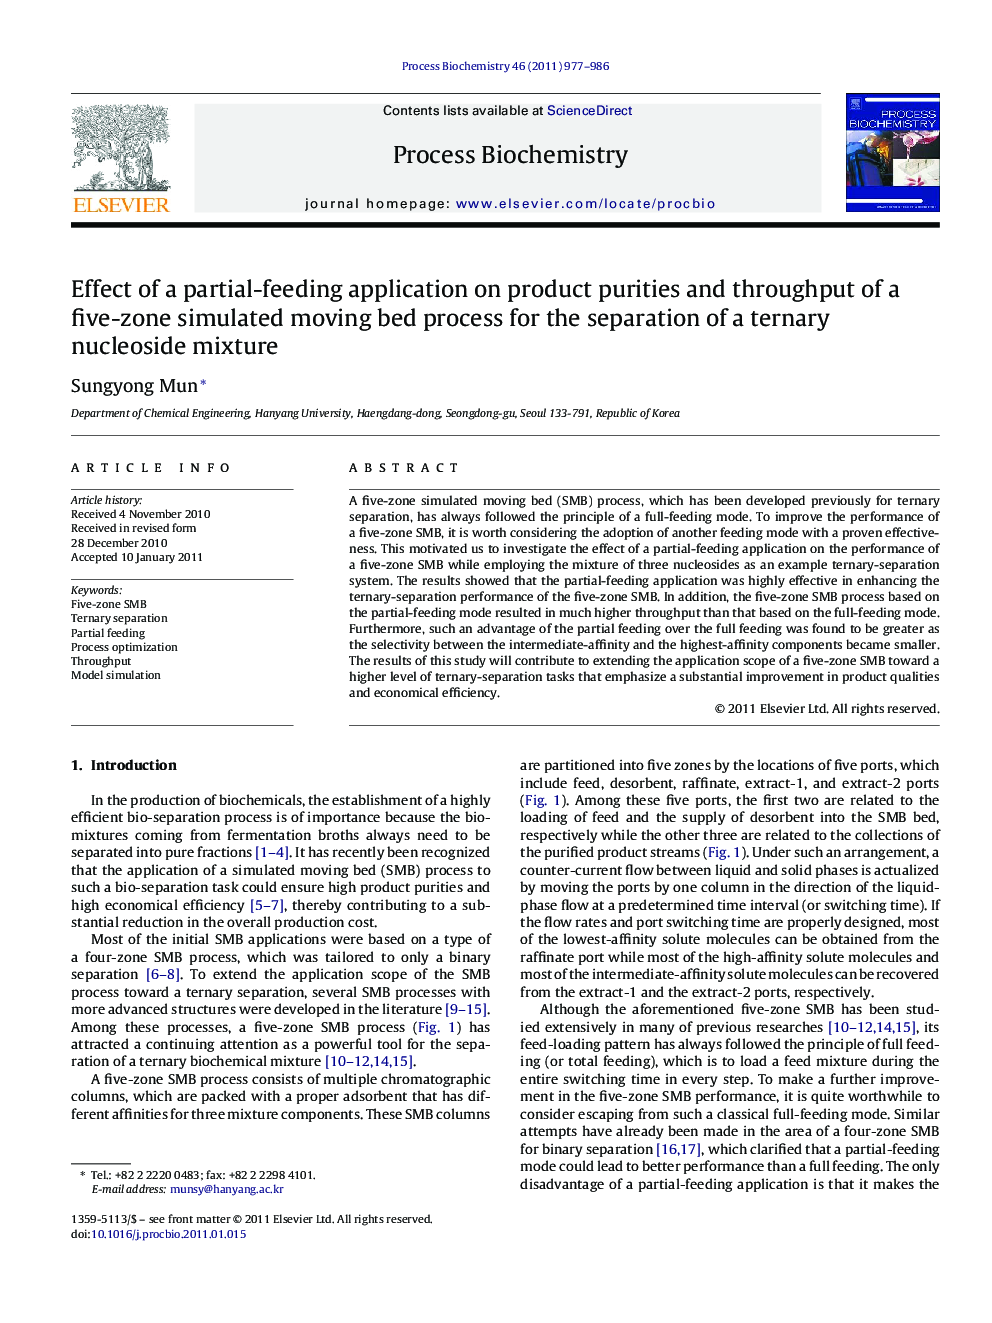 Effect of a partial-feeding application on product purities and throughput of a five-zone simulated moving bed process for the separation of a ternary nucleoside mixture